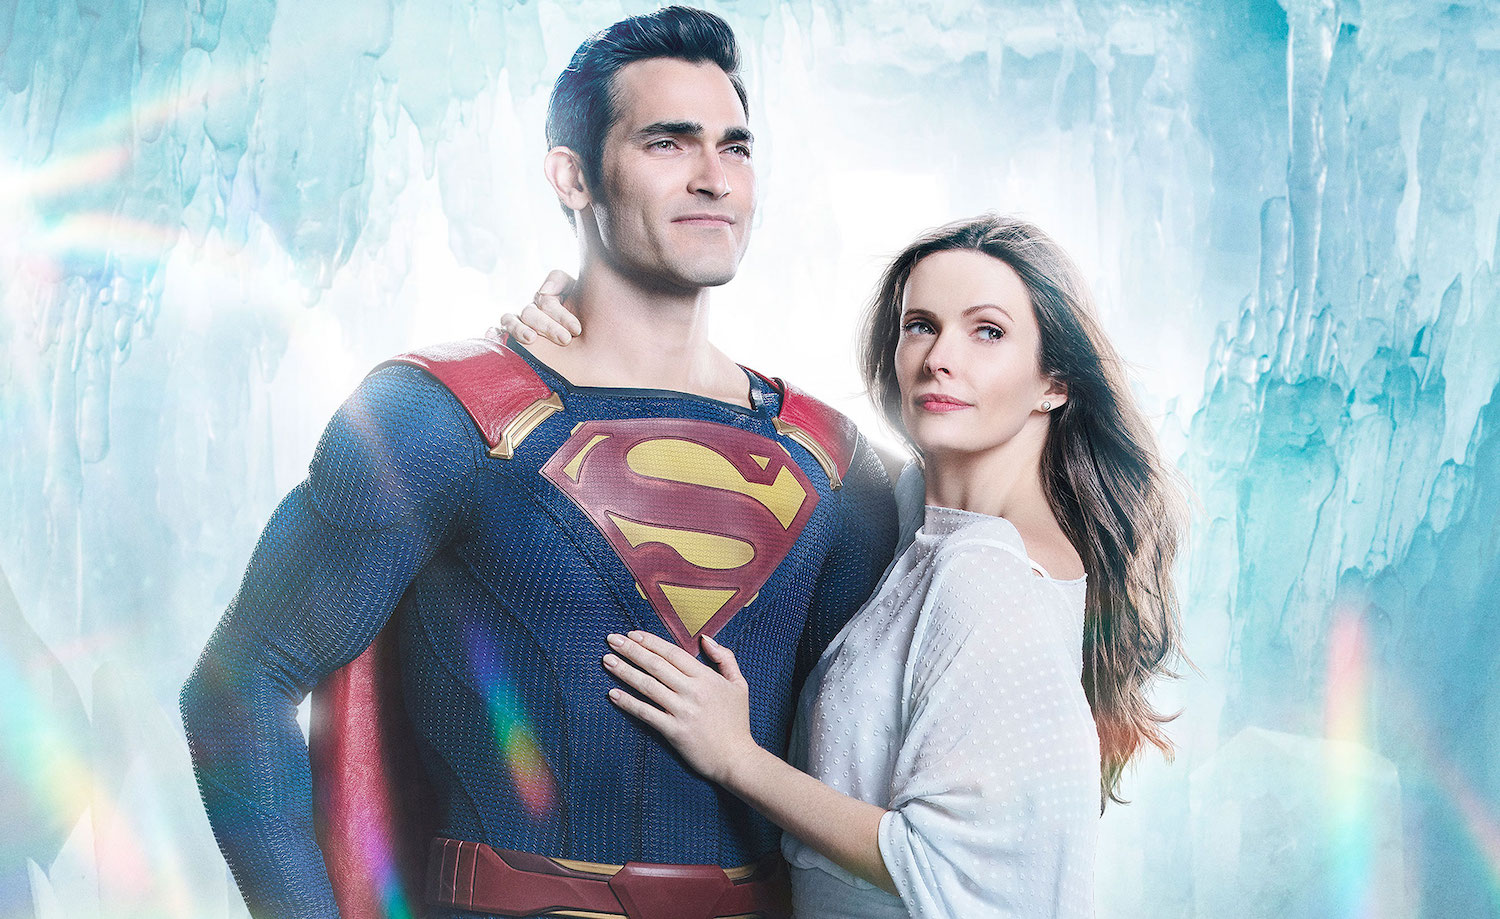 'Superman & Lois' series is in development for The CW